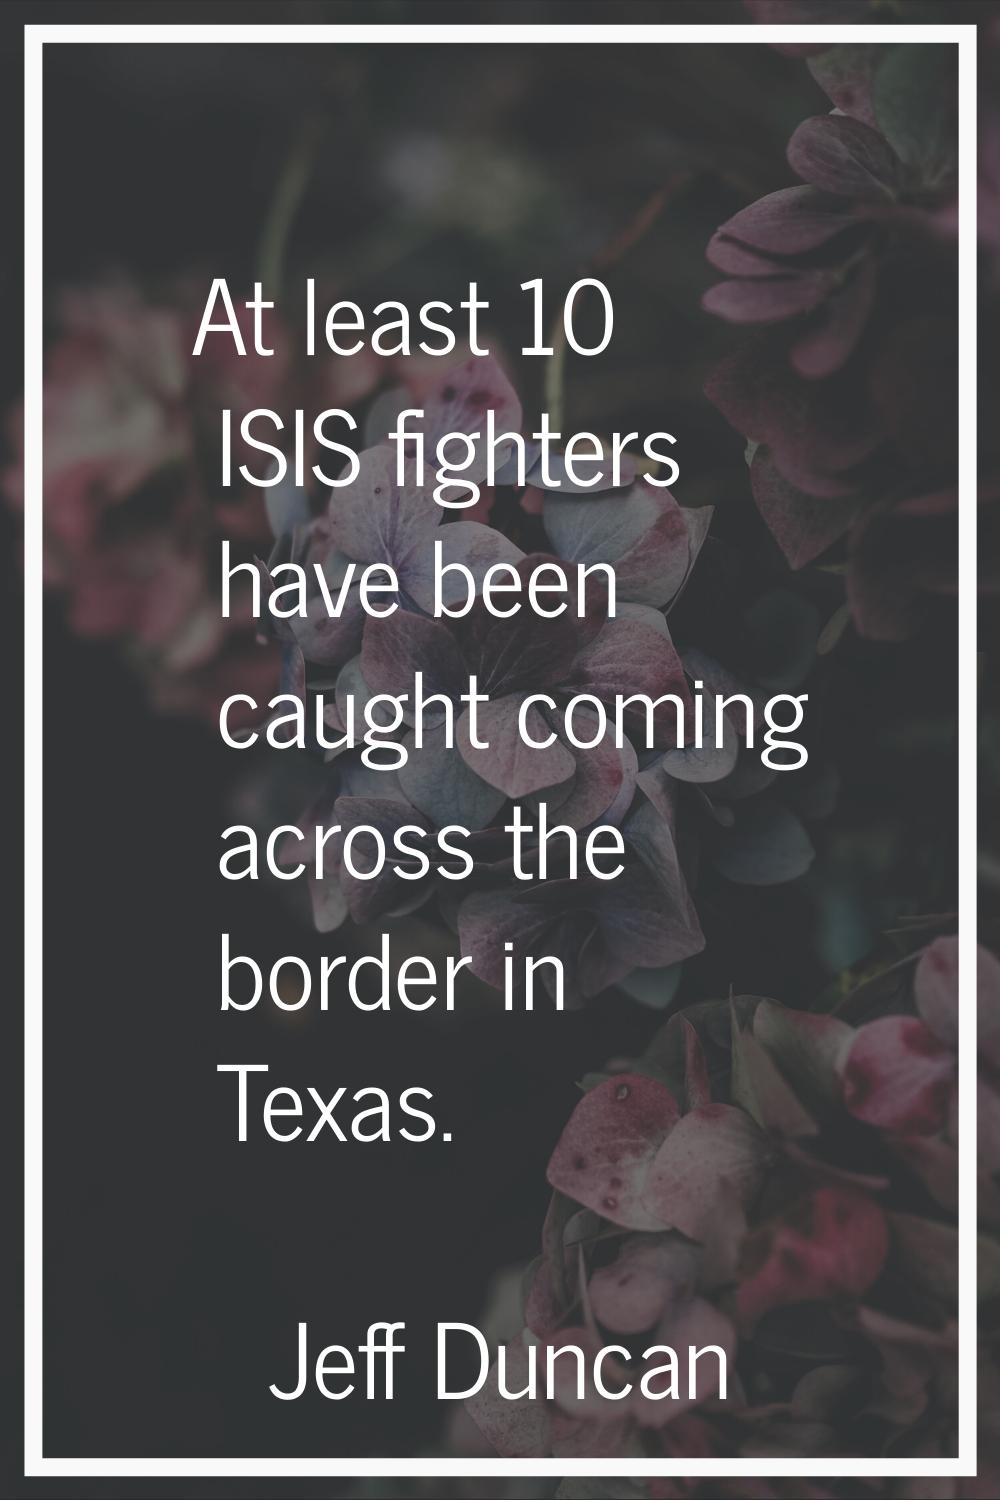 At least 10 ISIS fighters have been caught coming across the border in Texas.